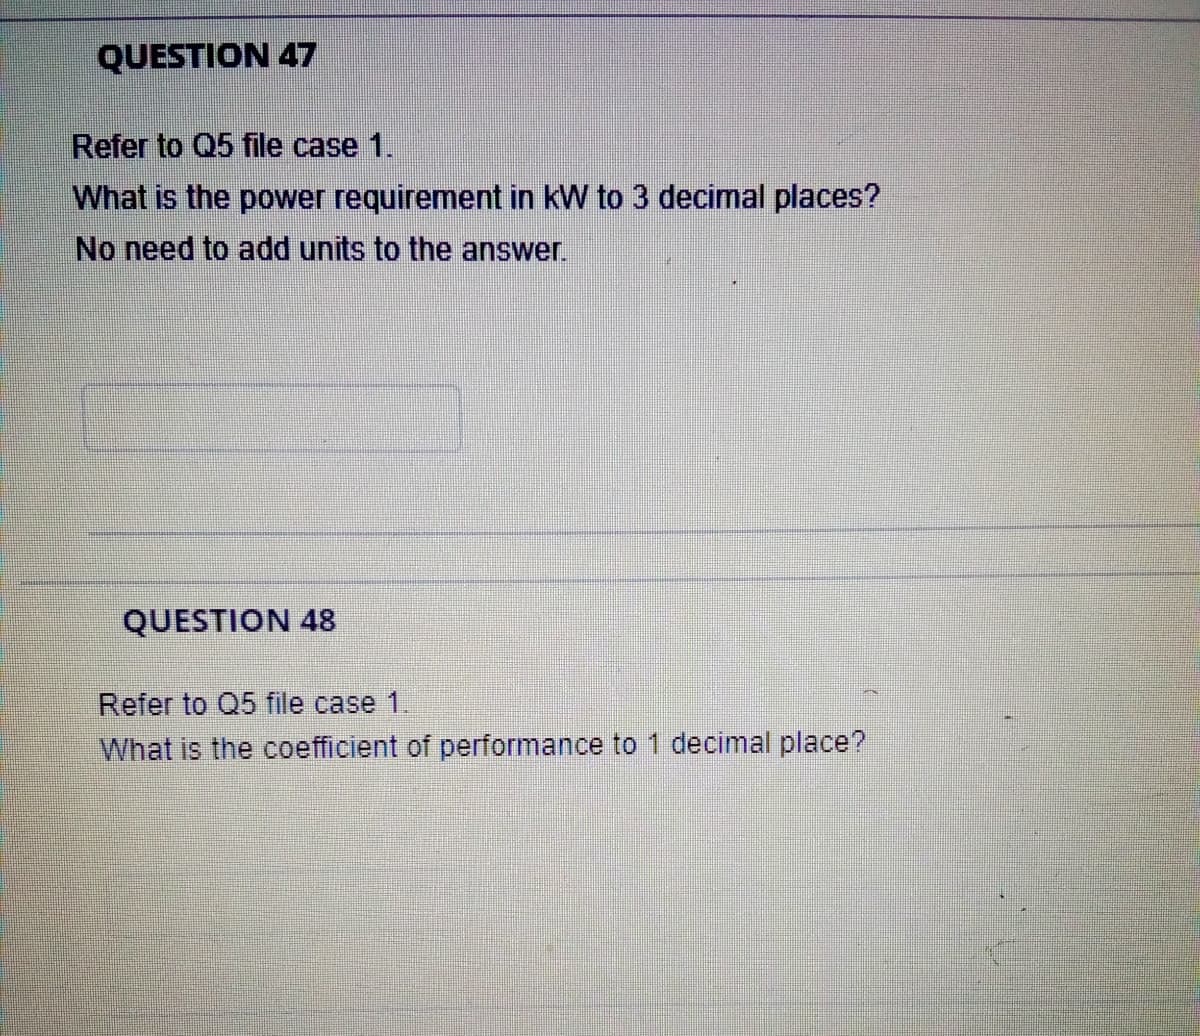 QUESTION 47
Refer to Q5 file case 1.
What is the power requirement in kW to 3 decimal places?
No need to add units to the answer.
QUESTION 48
Refer to Q5 file case 1.
What is the coefficient of performance to 1 decimal place?
